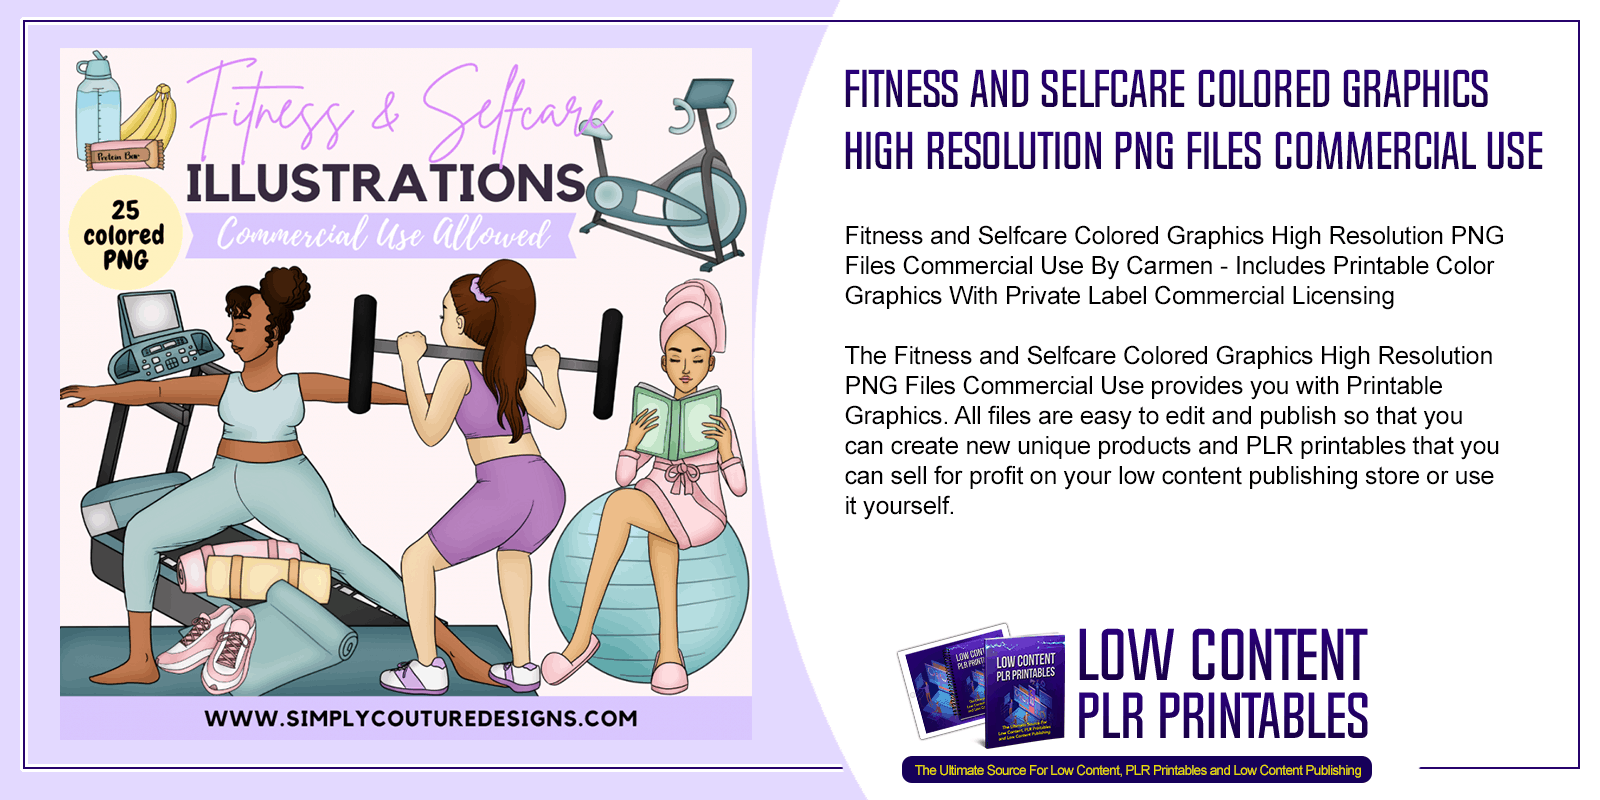 Fitness and Selfcare Colored Graphics High Resolution PNG Files Commercial Use